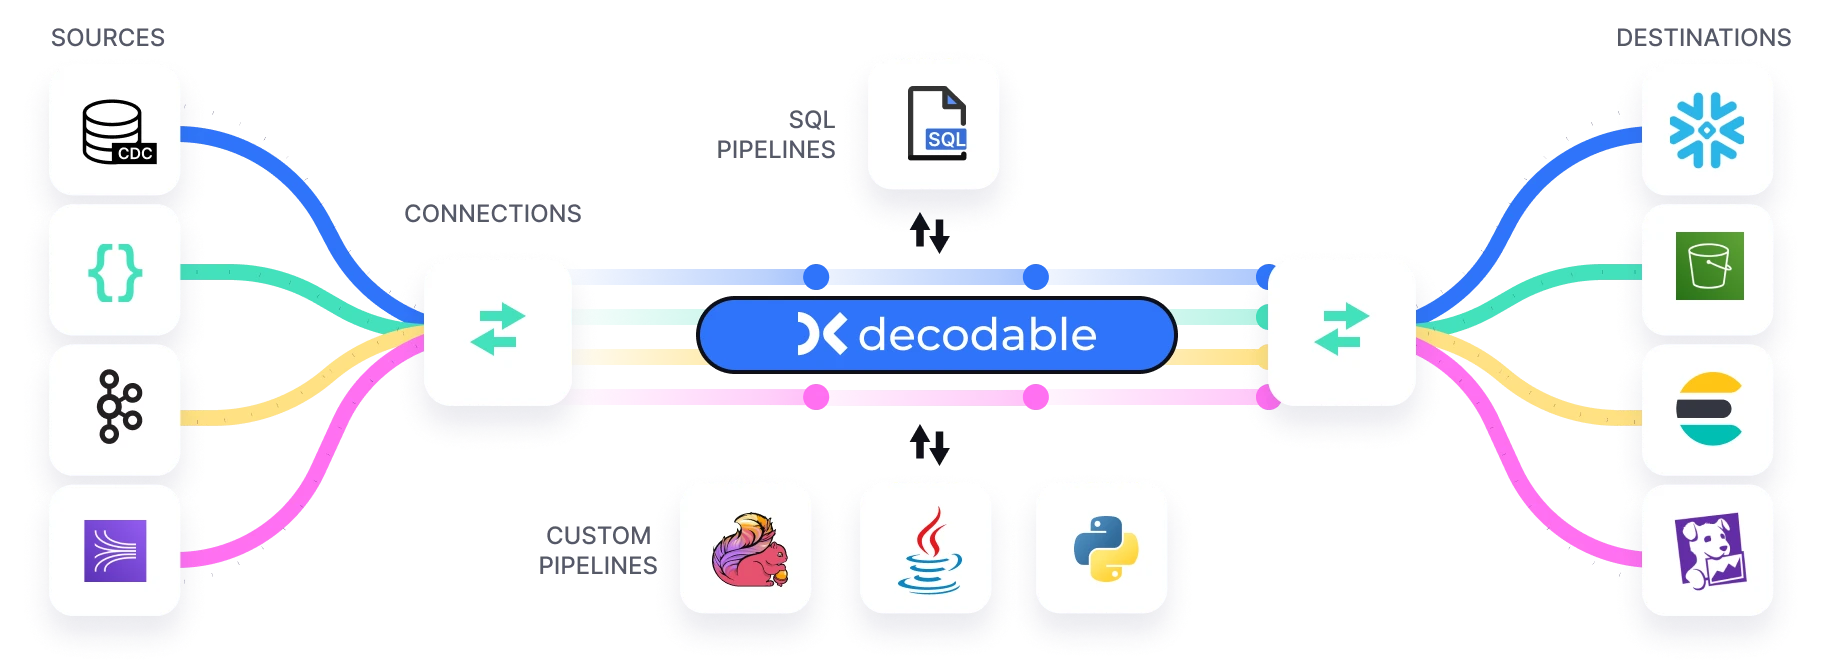 Overview diagram showing the end-to-end flow of data through Decodable. Connect Decodable to external data sources using connections. Data travels through Decodable via streams